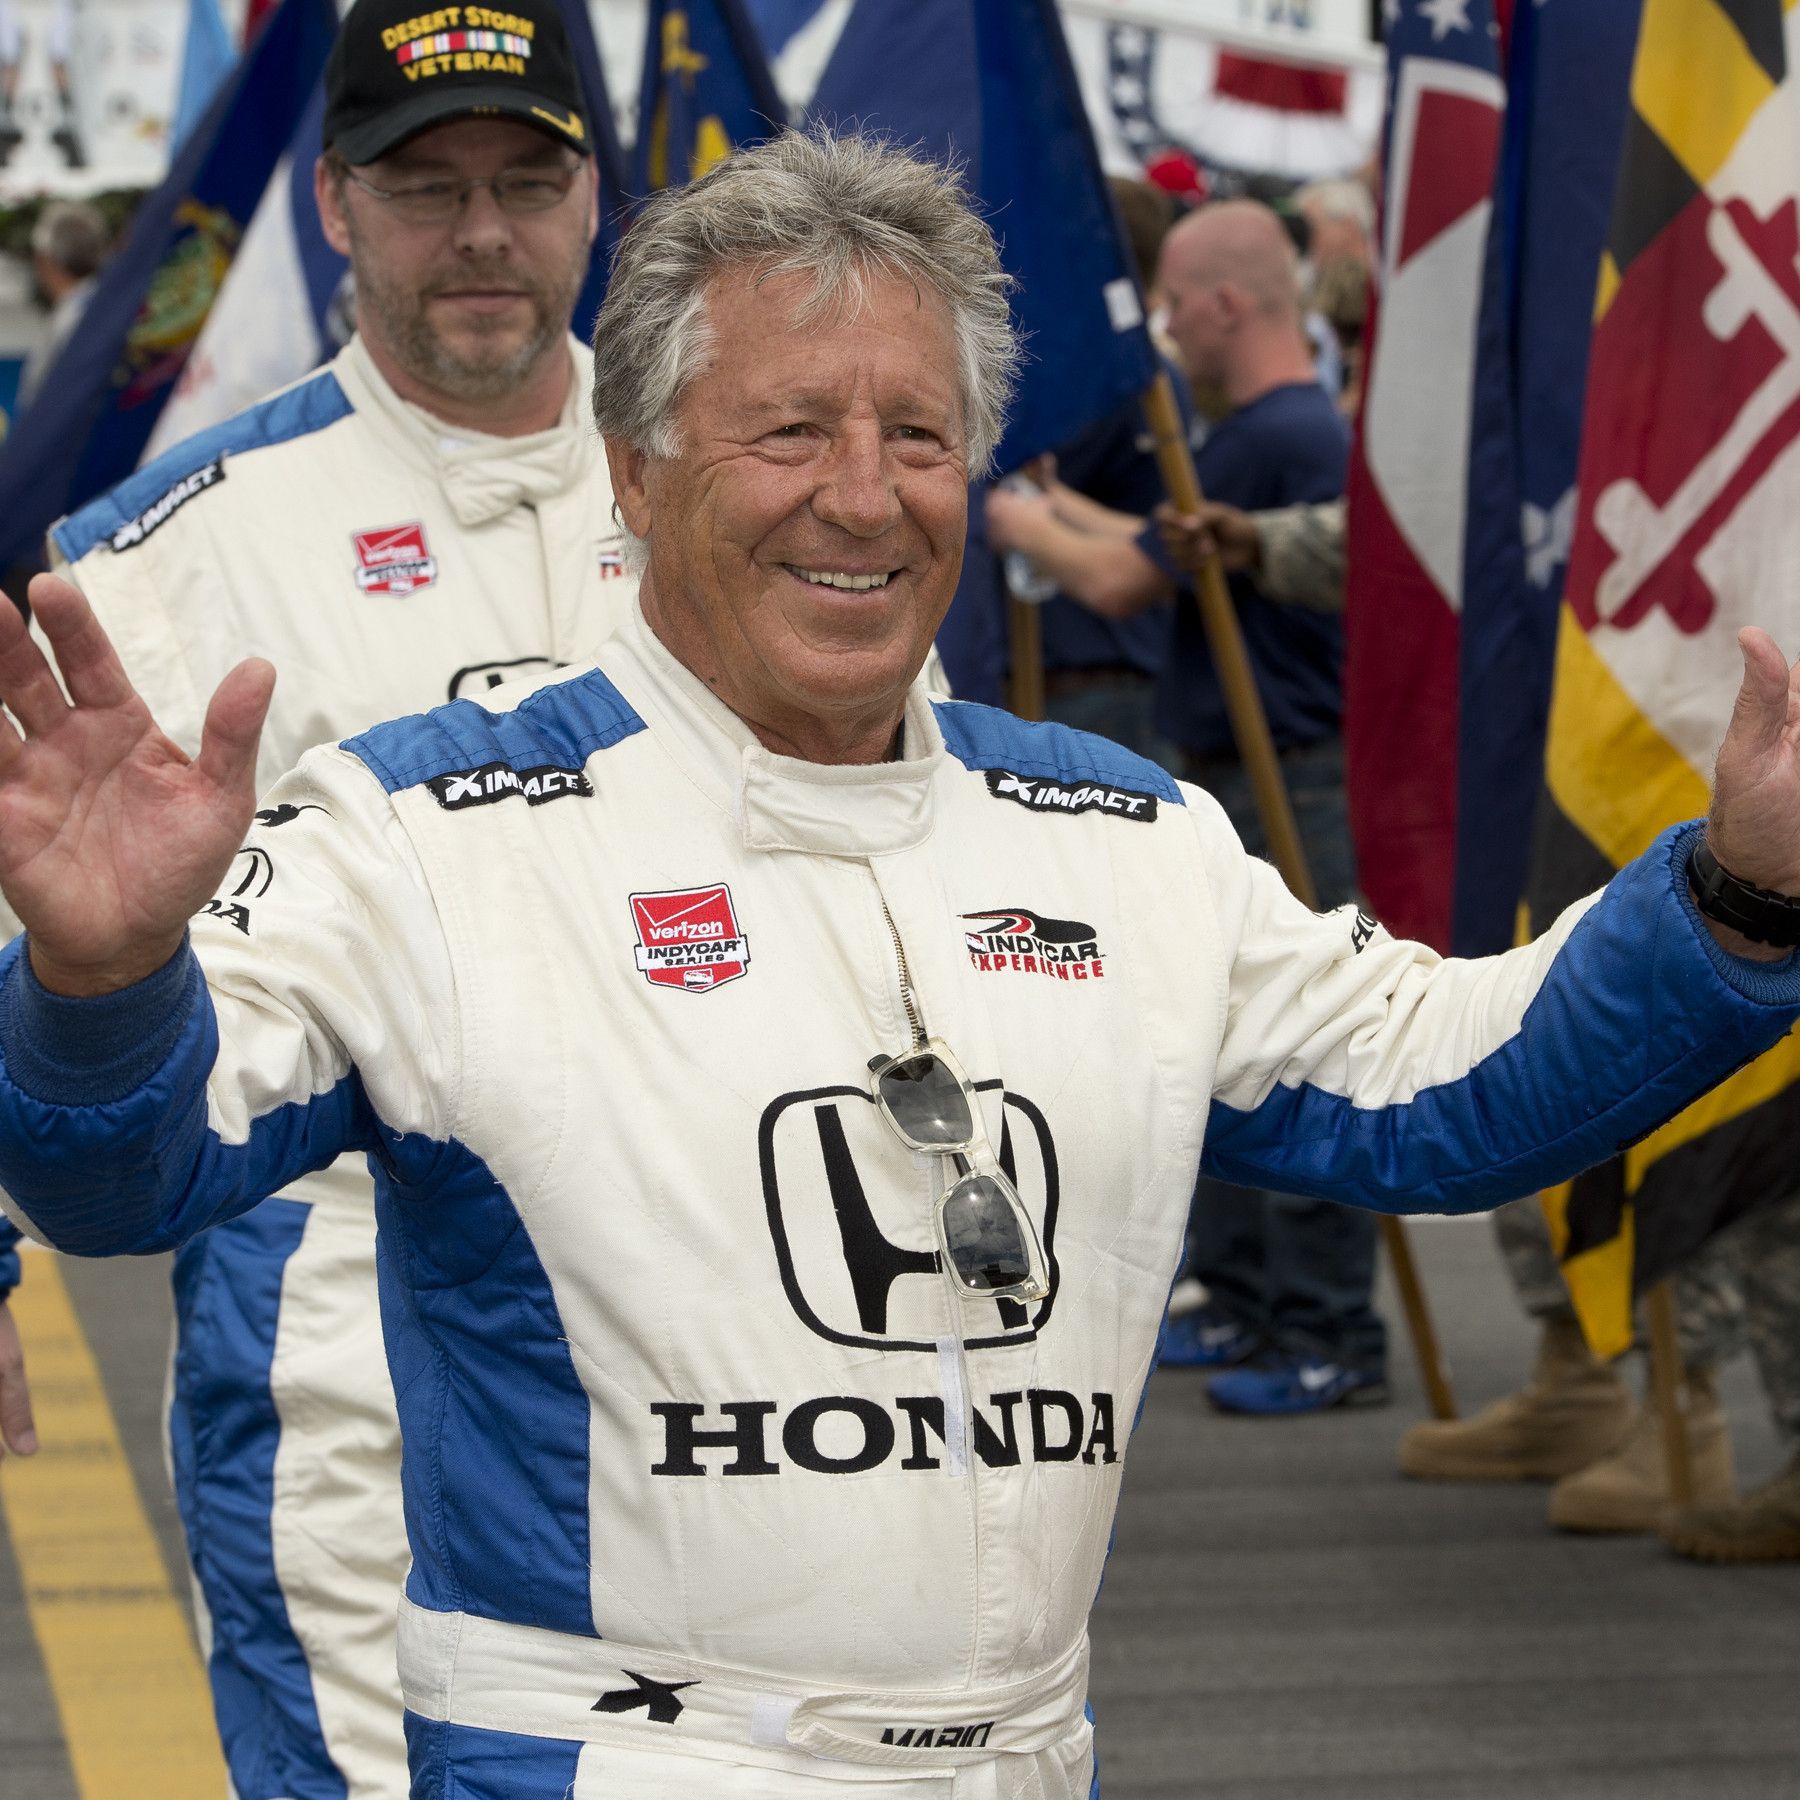 Mario Andretti in mostly white motorsuit looking happy